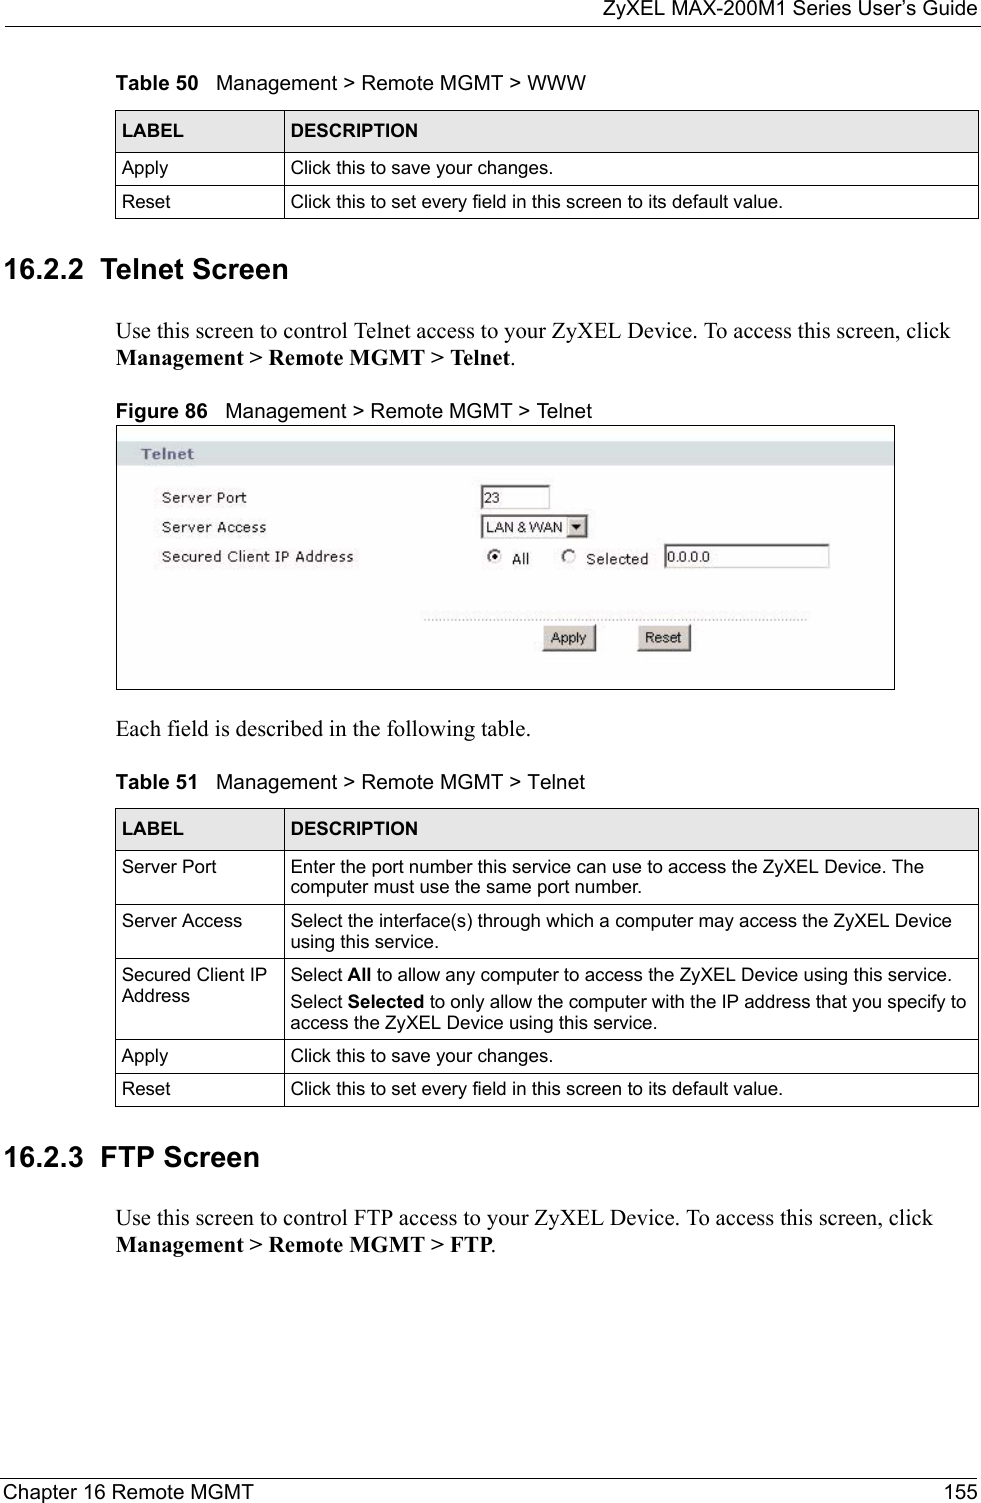 ZyXEL MAX-200M1 Series User’s GuideChapter 16 Remote MGMT 15516.2.2  Telnet ScreenUse this screen to control Telnet access to your ZyXEL Device. To access this screen, click Management &gt; Remote MGMT &gt; Telnet.Figure 86   Management &gt; Remote MGMT &gt; TelnetEach field is described in the following table.16.2.3  FTP ScreenUse this screen to control FTP access to your ZyXEL Device. To access this screen, click Management &gt; Remote MGMT &gt; FTP.Apply Click this to save your changes.Reset Click this to set every field in this screen to its default value.Table 50   Management &gt; Remote MGMT &gt; WWWLABEL DESCRIPTIONTable 51   Management &gt; Remote MGMT &gt; TelnetLABEL DESCRIPTIONServer Port Enter the port number this service can use to access the ZyXEL Device. The computer must use the same port number.Server Access Select the interface(s) through which a computer may access the ZyXEL Device using this service.Secured Client IP AddressSelect All to allow any computer to access the ZyXEL Device using this service.Select Selected to only allow the computer with the IP address that you specify to access the ZyXEL Device using this service.Apply Click this to save your changes.Reset Click this to set every field in this screen to its default value.